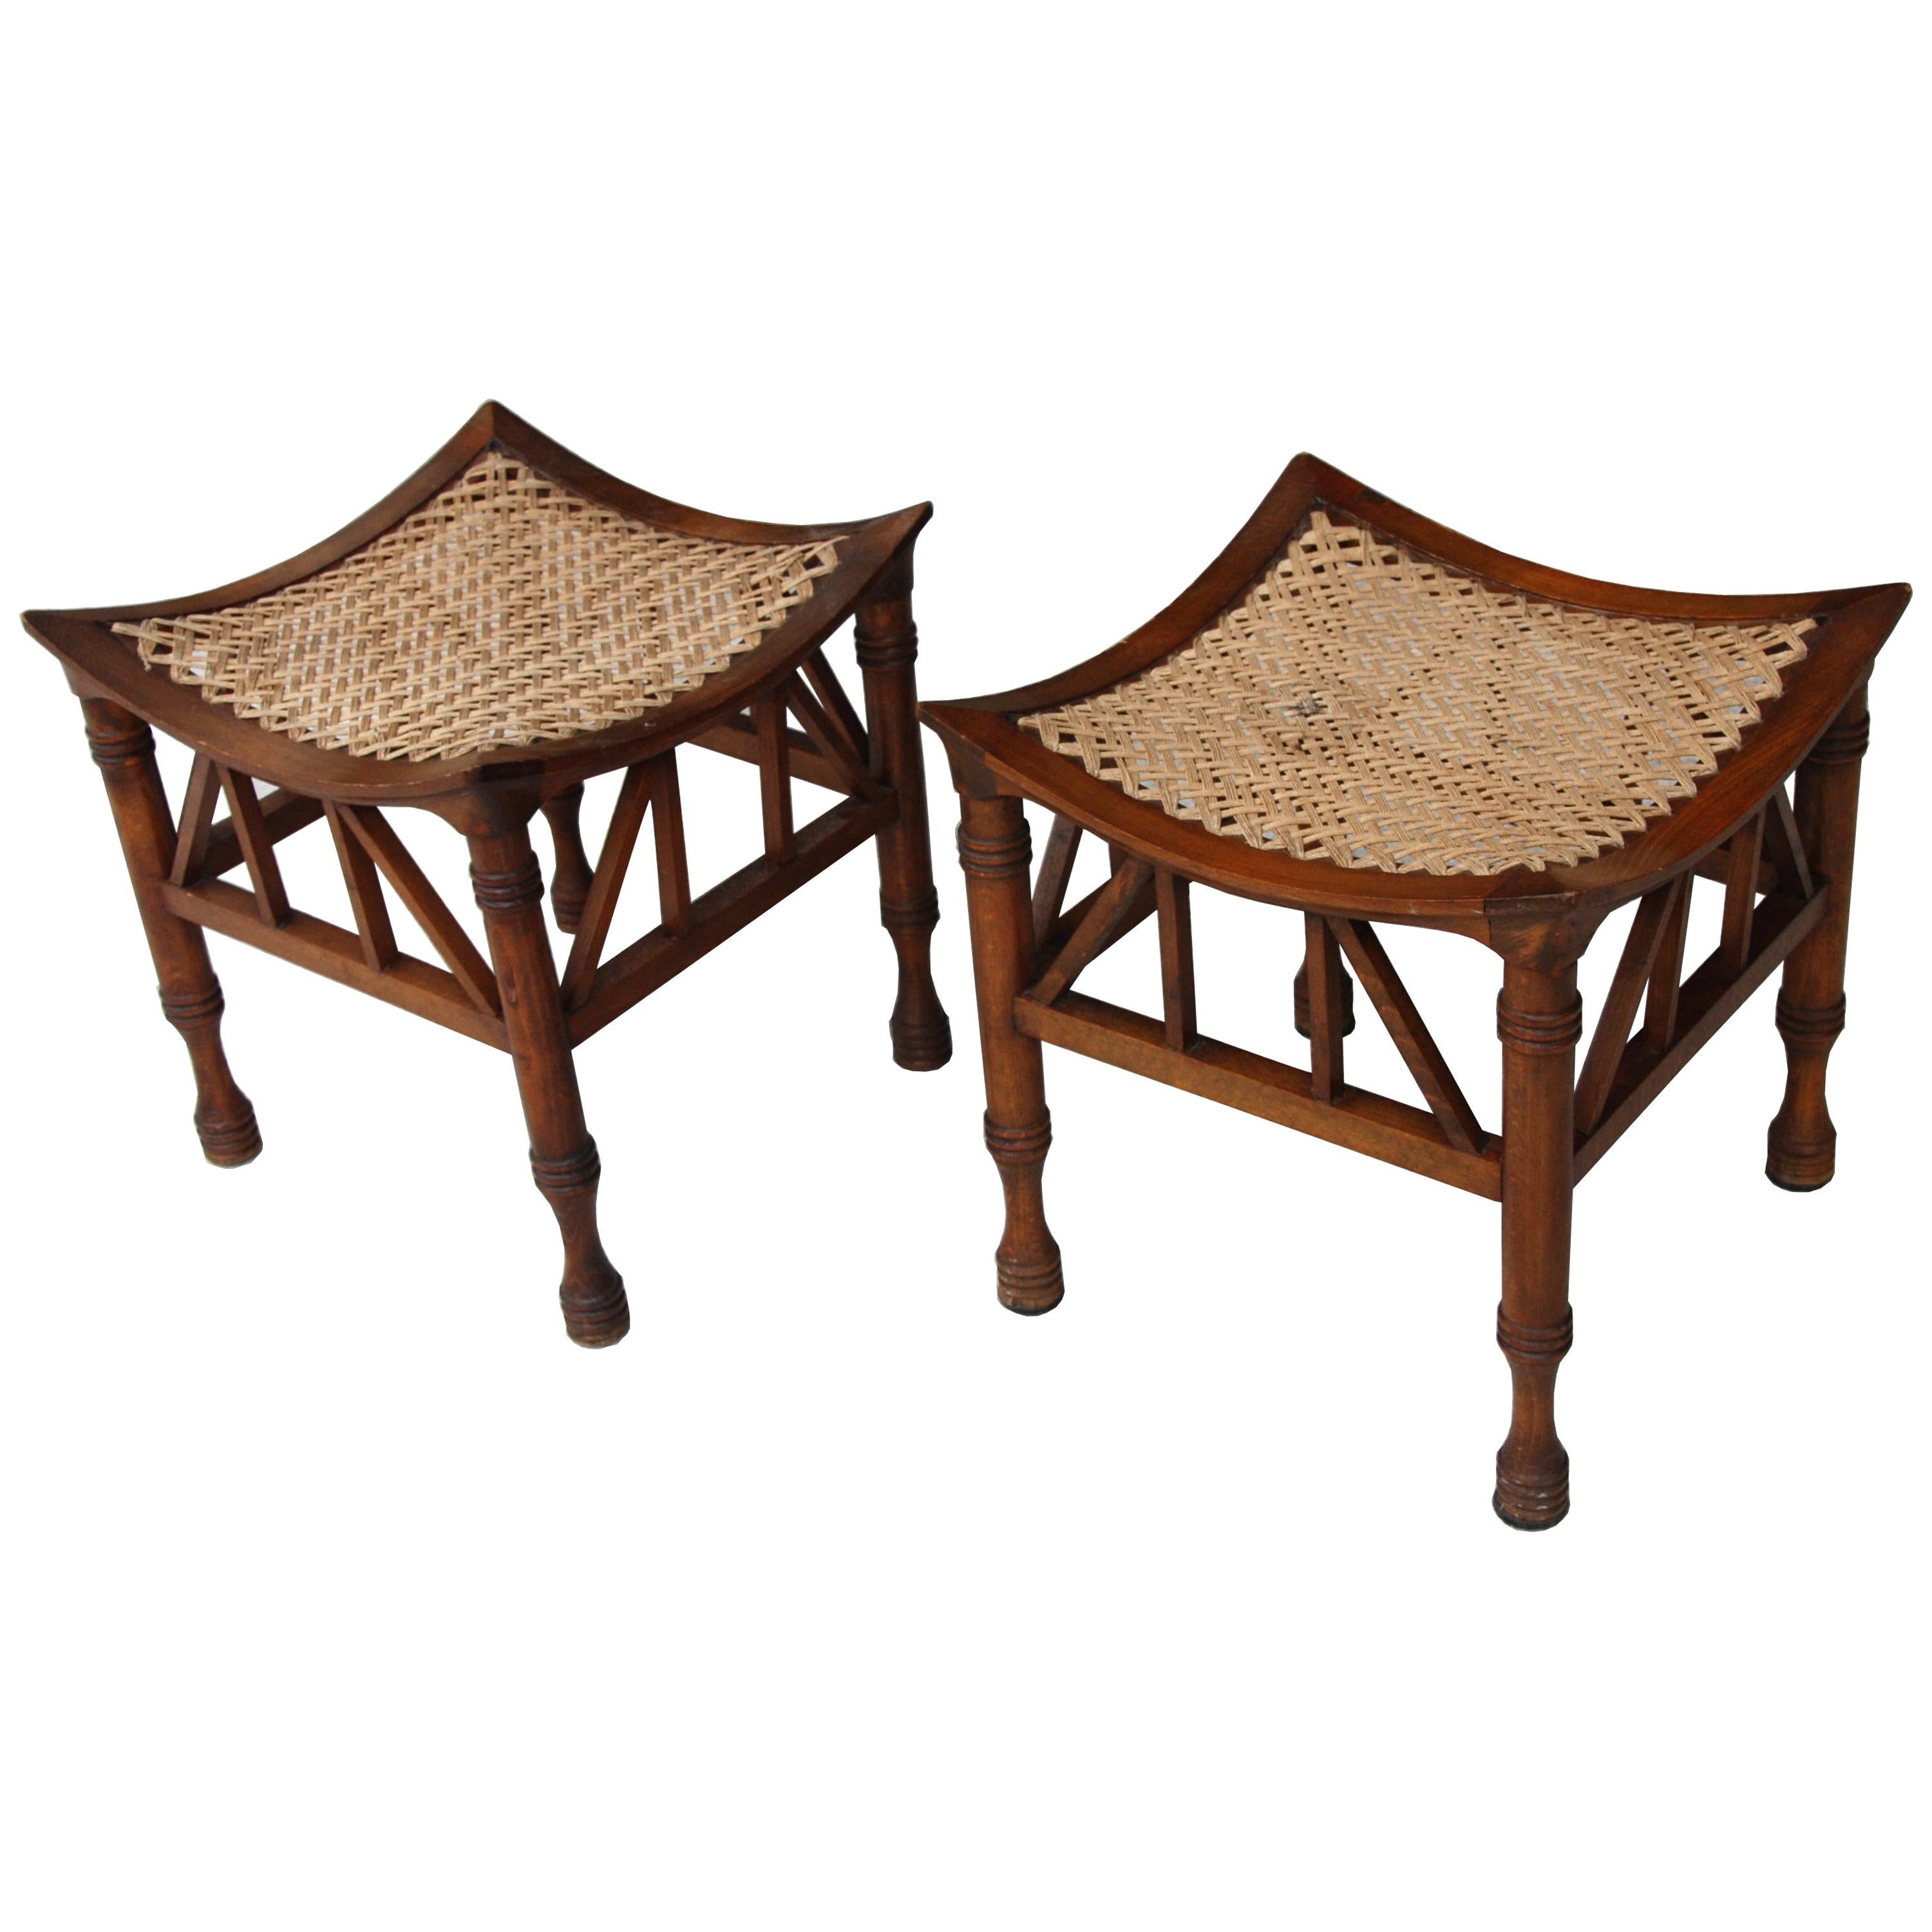 Pair of Early 20th Century Thebes Stools